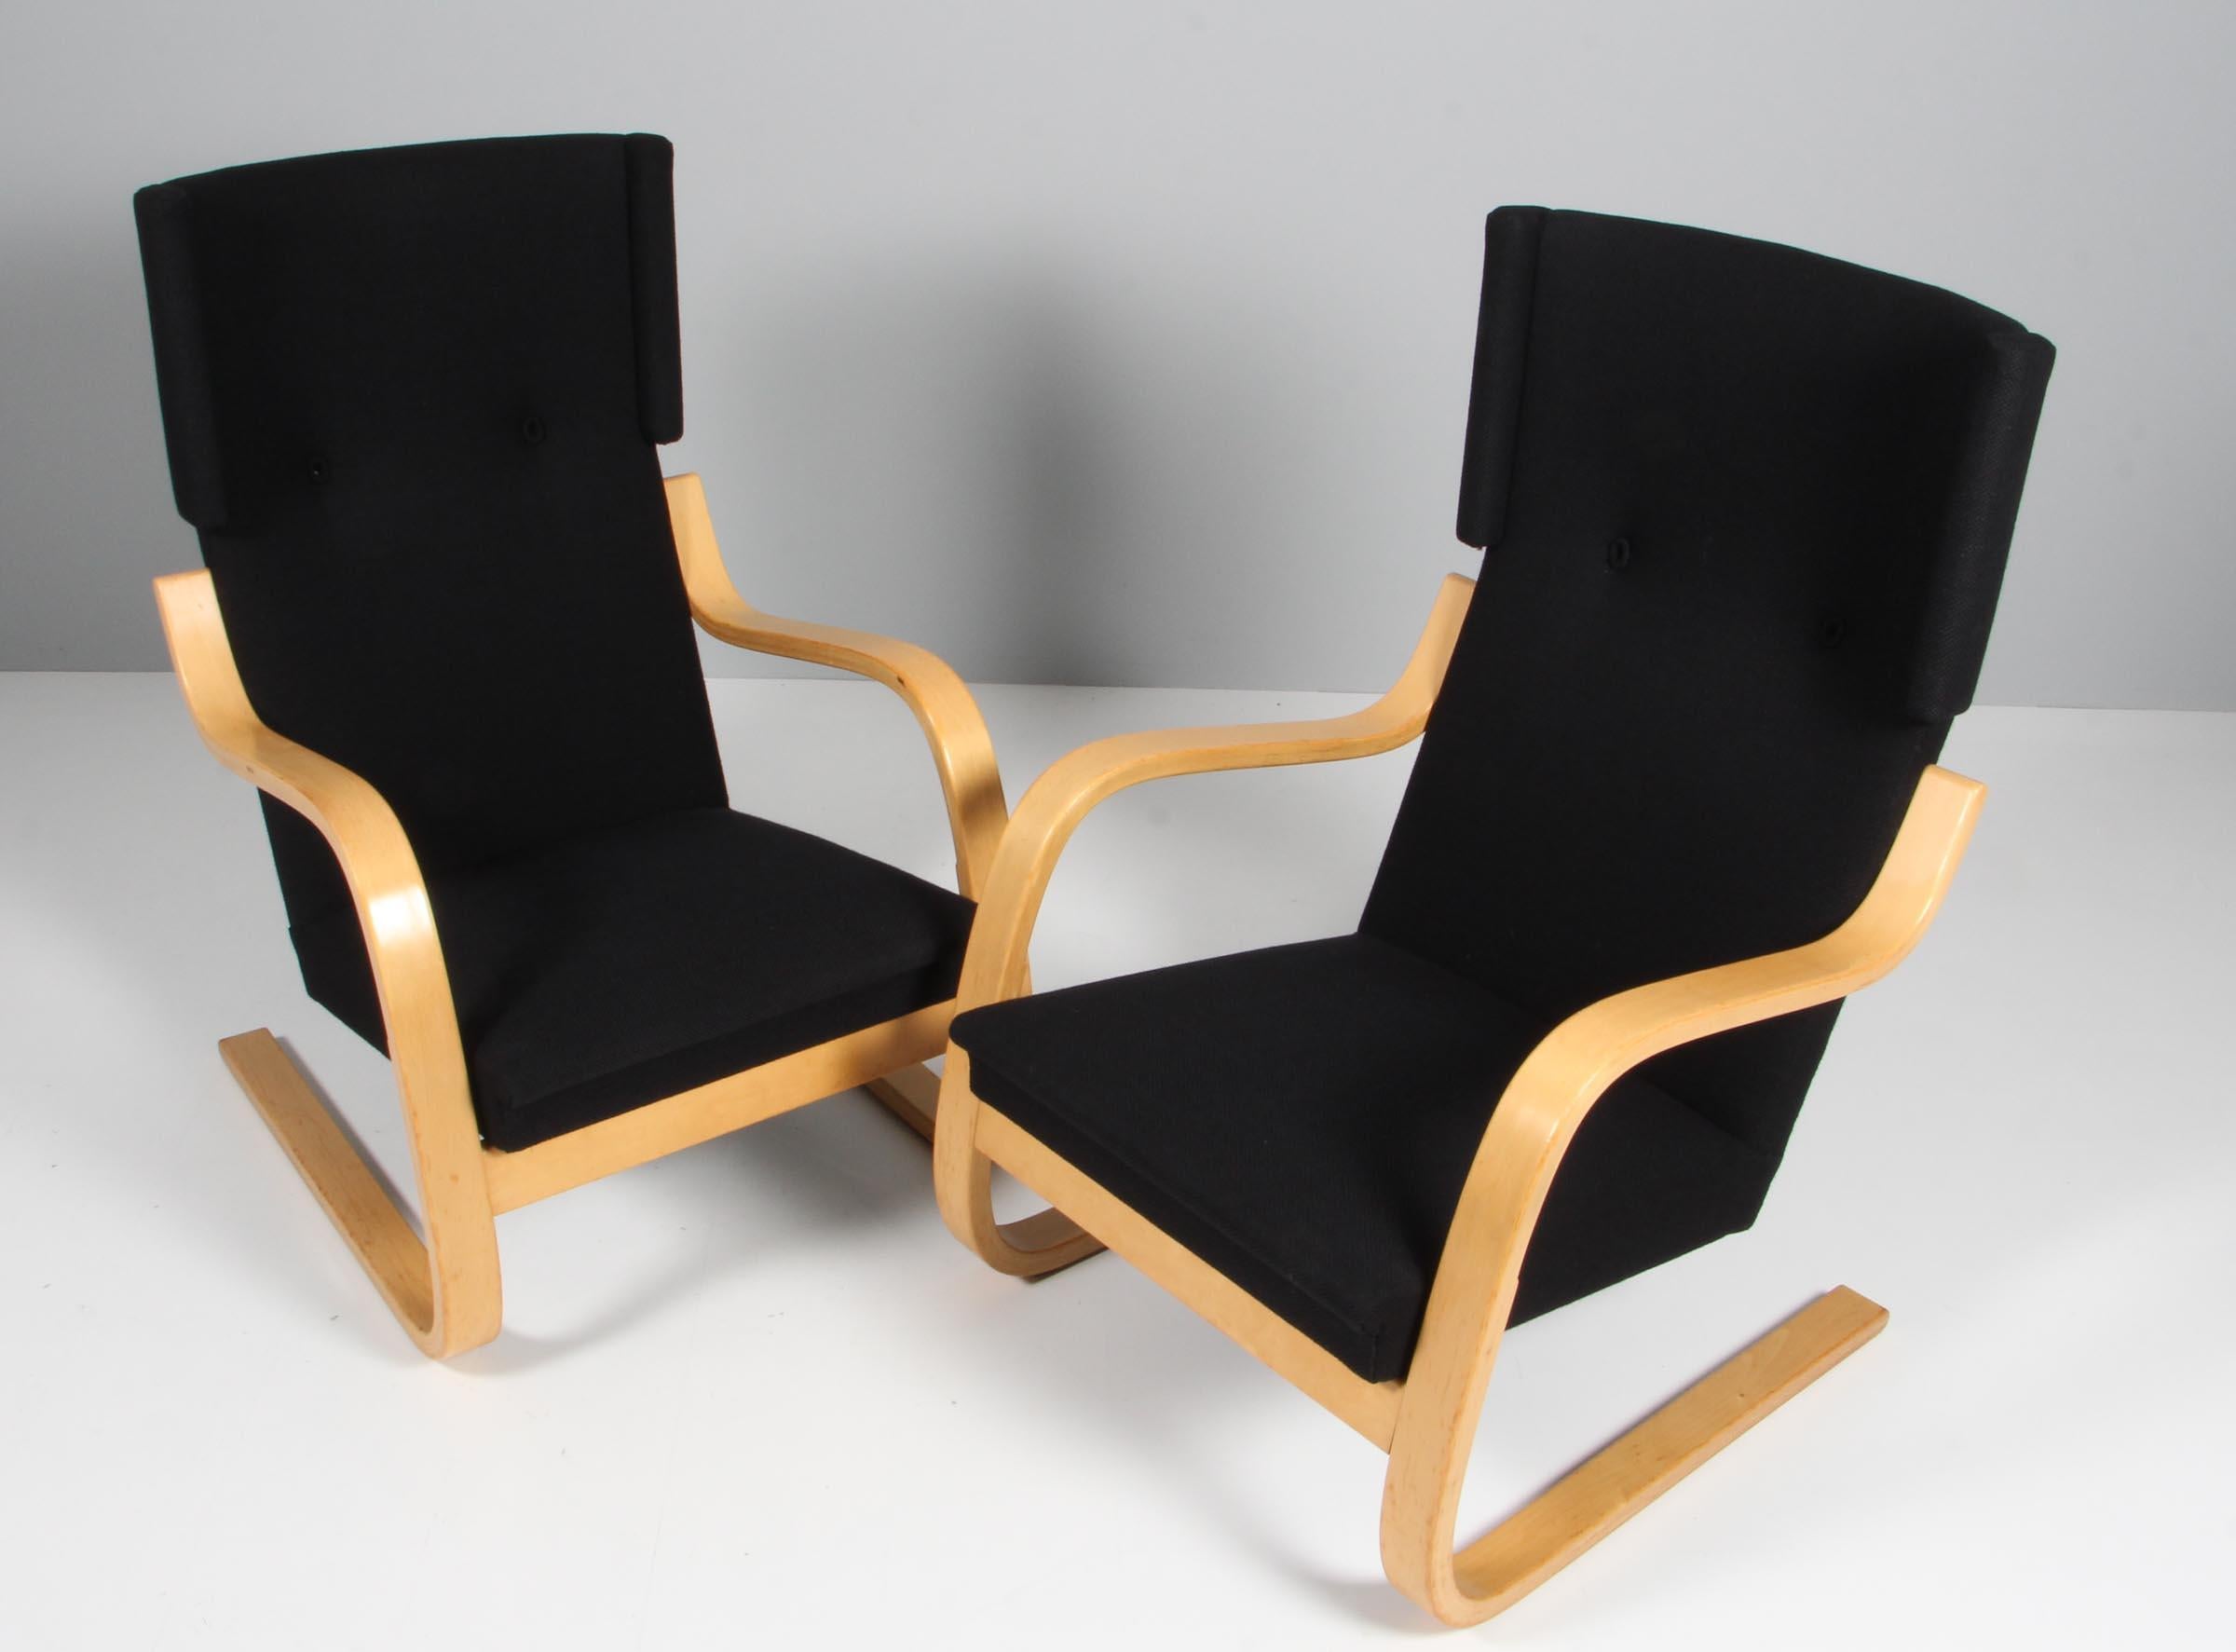 Lounge chairs / Winback chairs designed by Alvar Aalto manufactured, circa 1970s.

Original upholstered with black fabric.

Curved birch plywood and braided vegetable fiber. 
Measures: 74 x 61 x 69 cm.
 